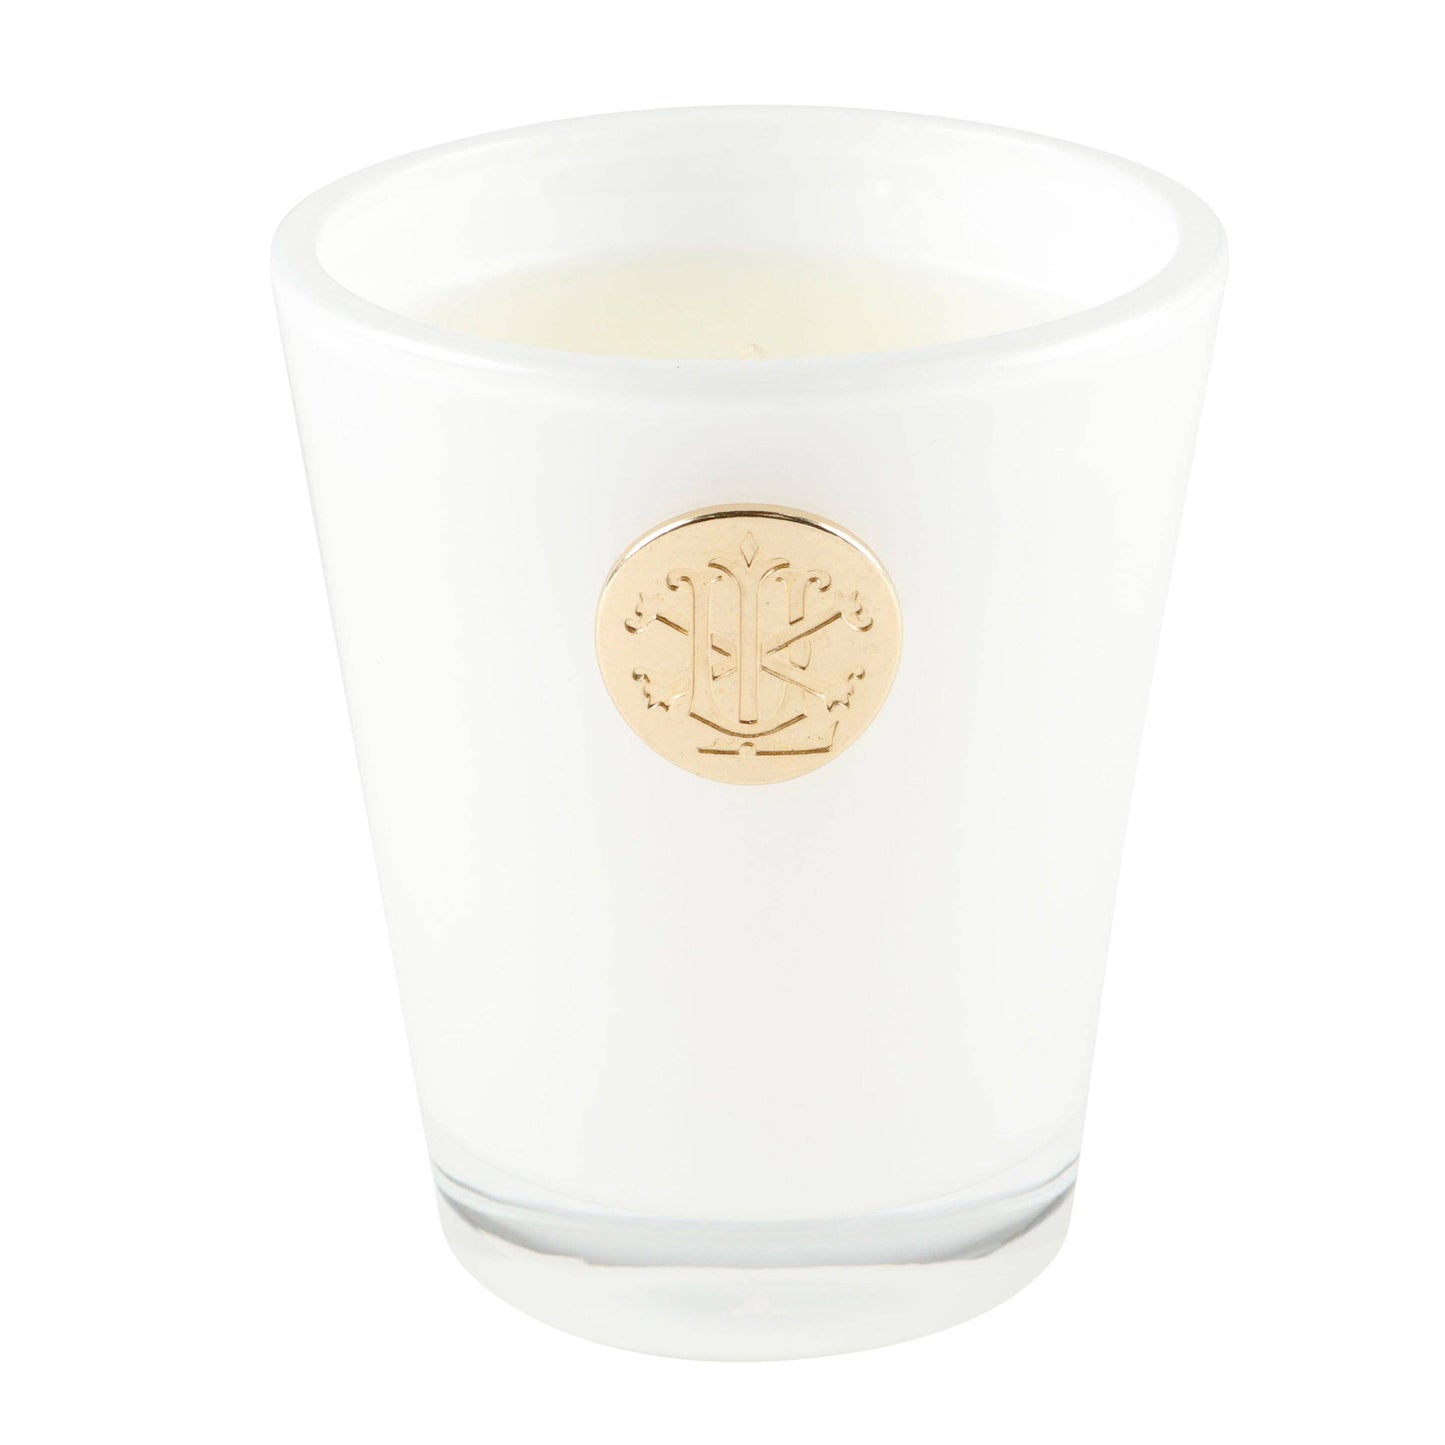 Lover's Lane Box Candle by Lux Fragrances